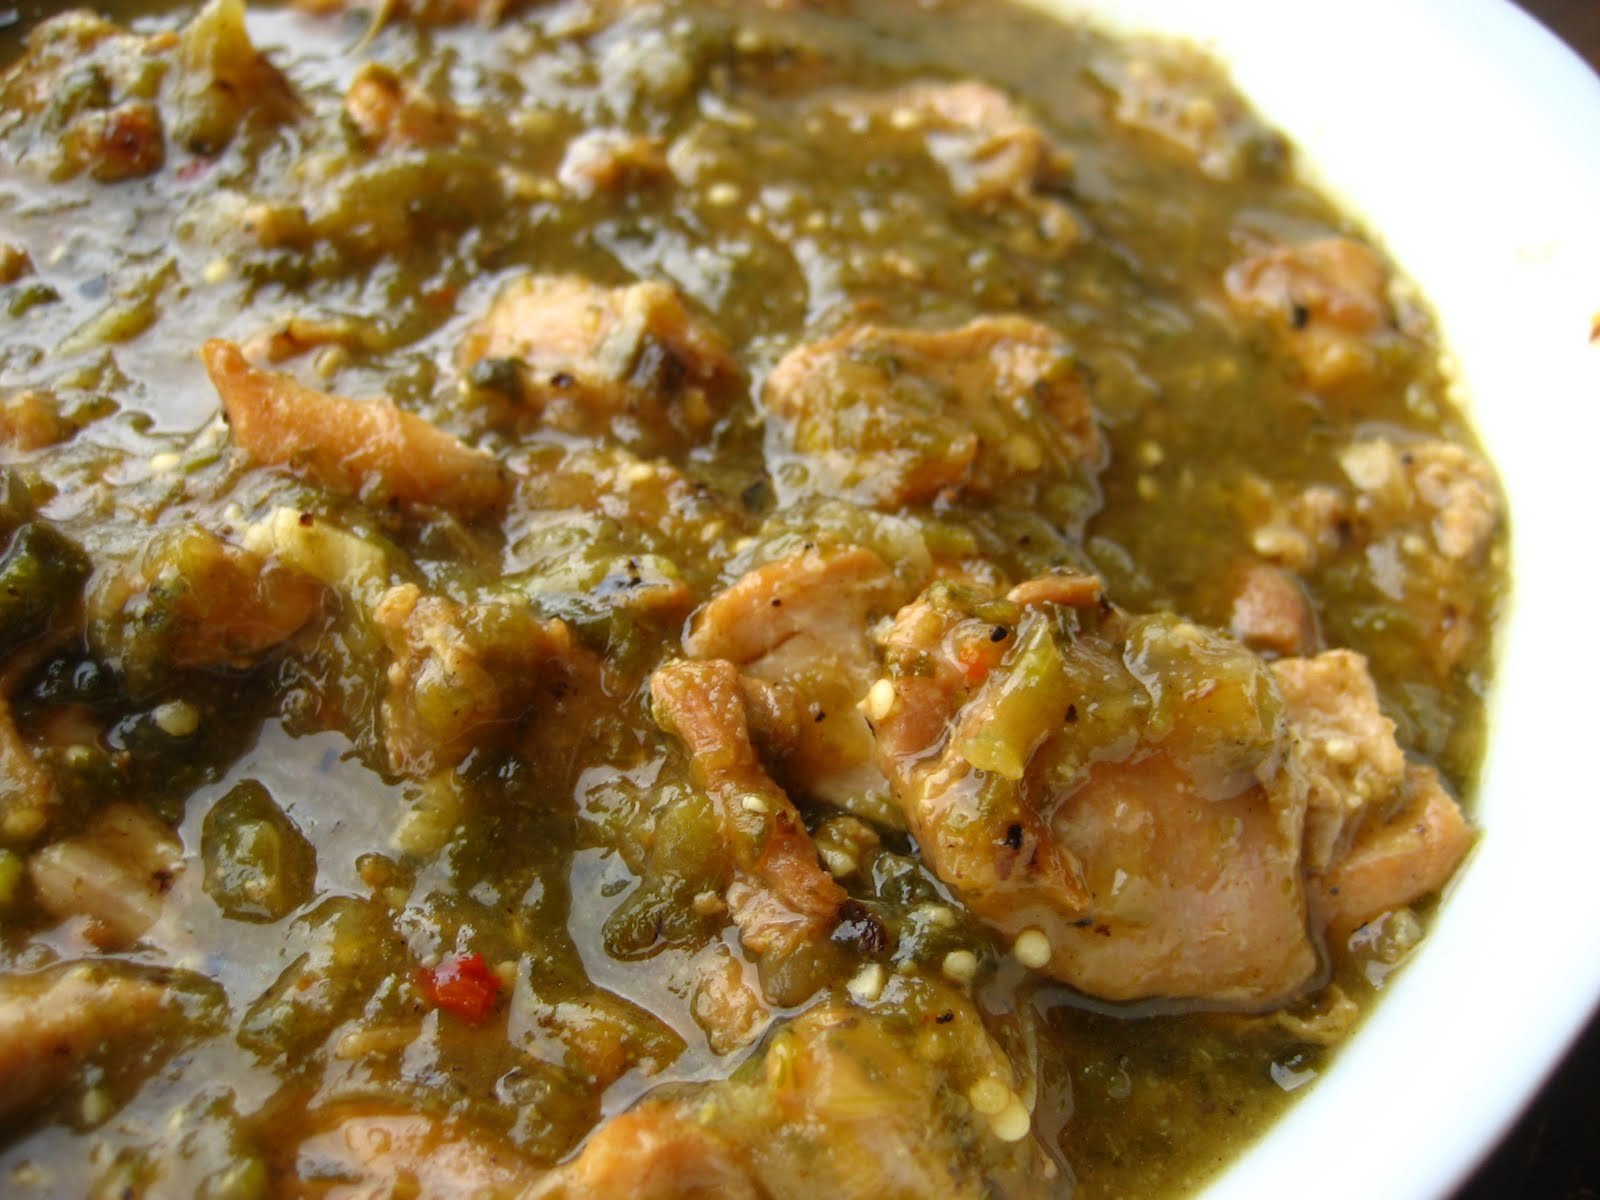 Authentic Pork Chili Verde Recipes
 Home Cooking In Montana Chile Verde With Chicken